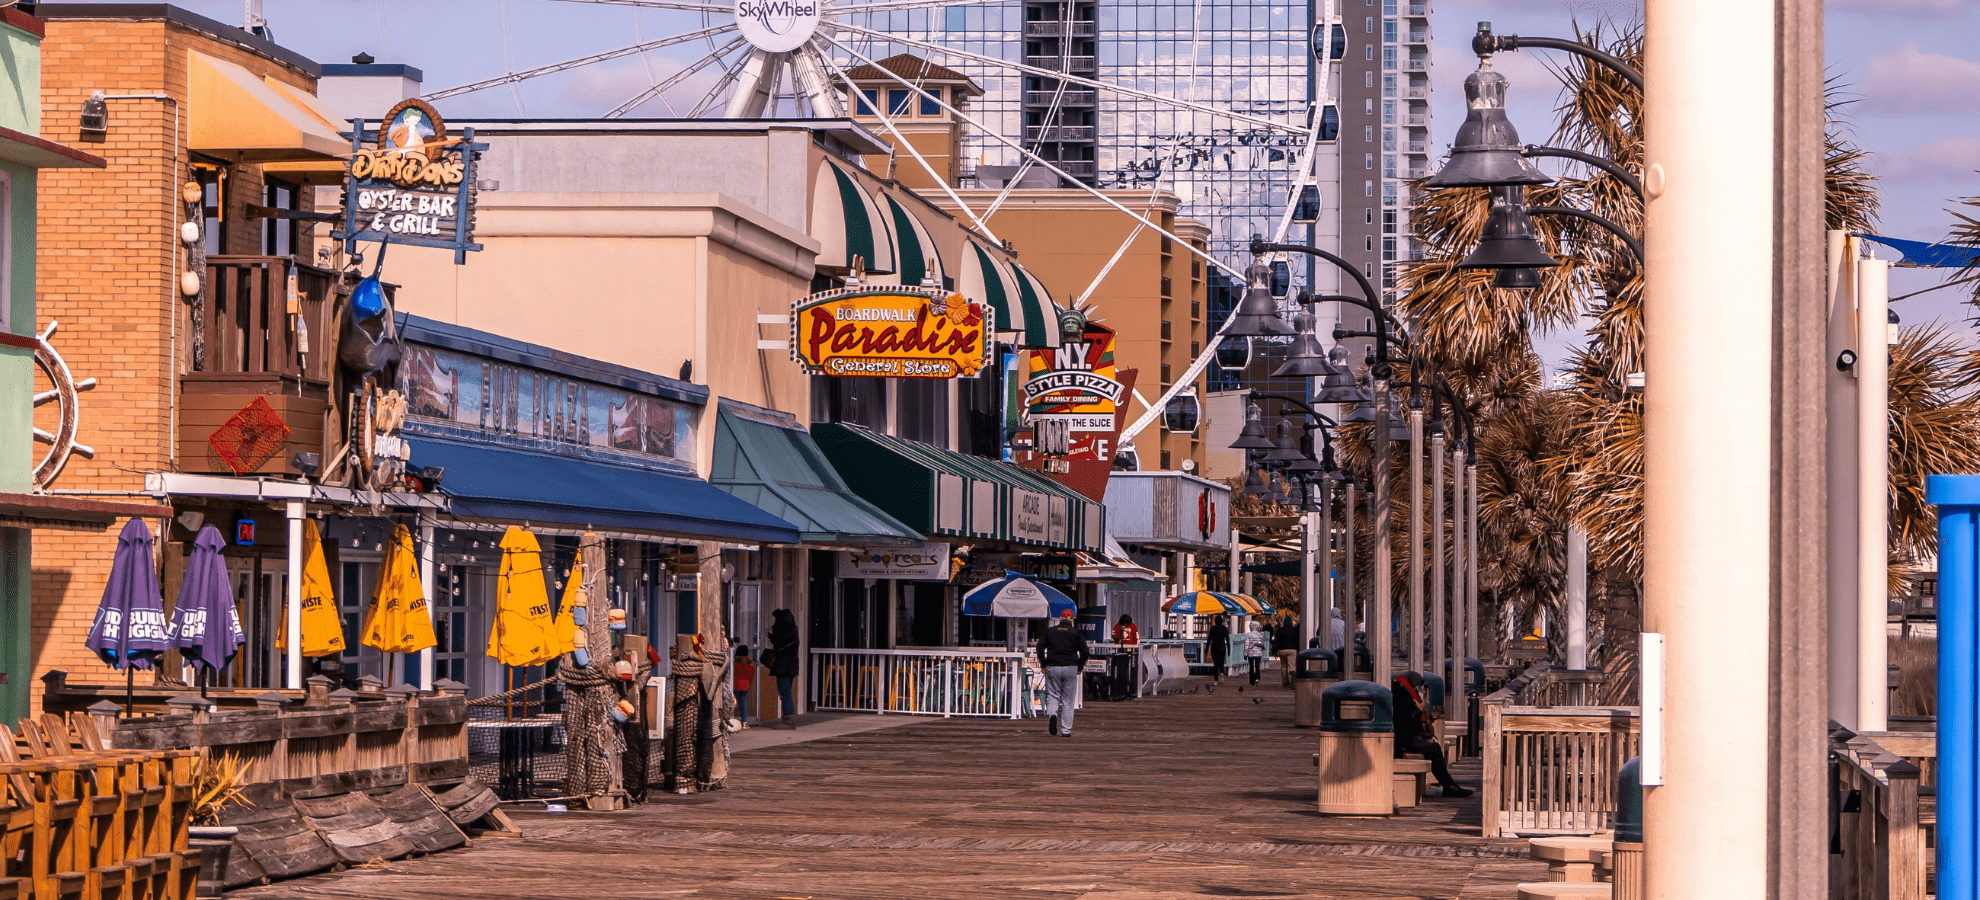 How to Spend the Day in Myrtle Beach Like a True Local